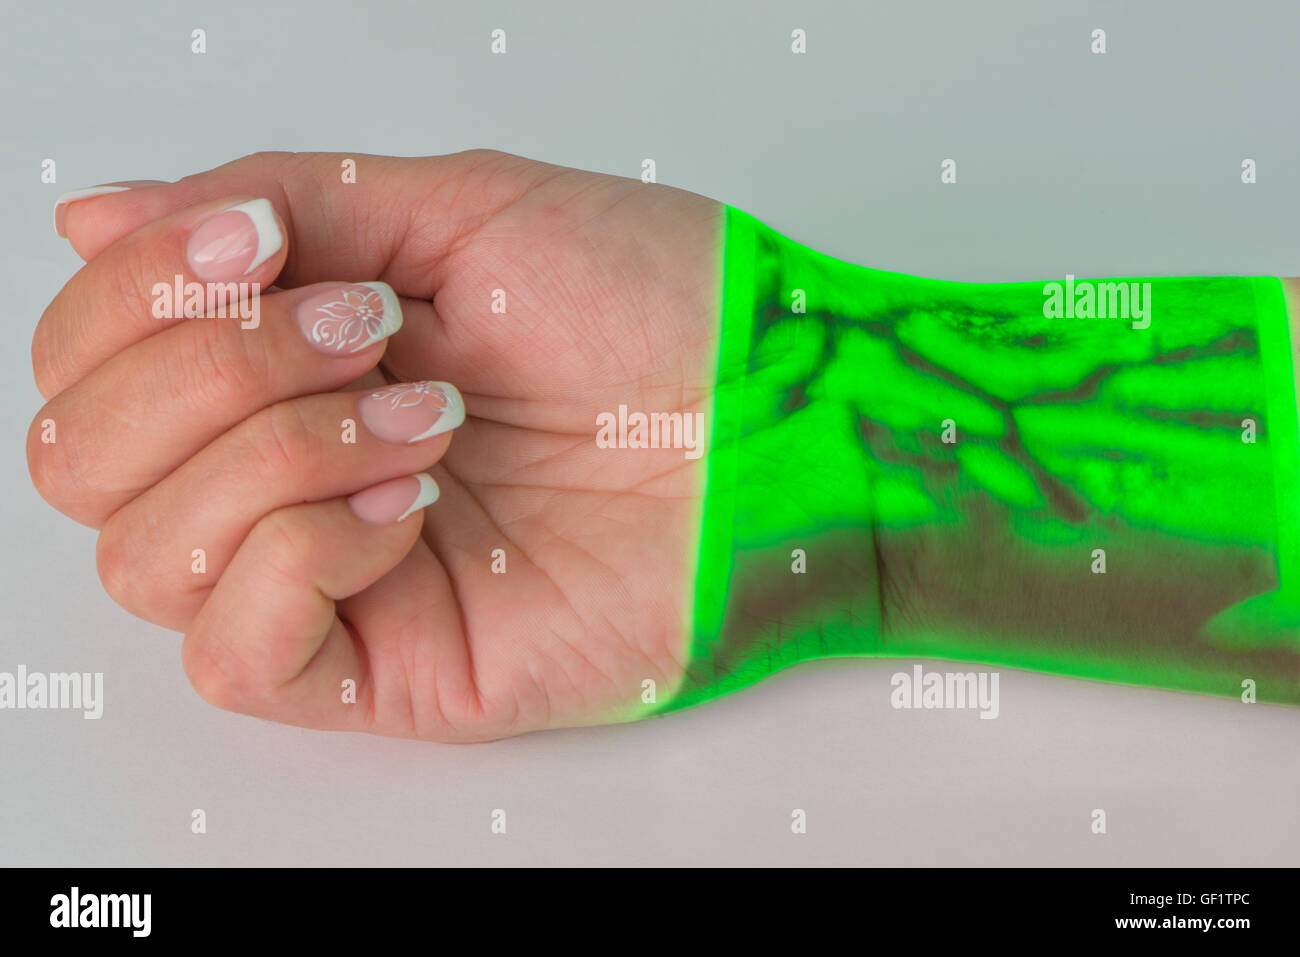 The venous drawing on a hand wrist received by means of Vein Viever Vision Stock Photo